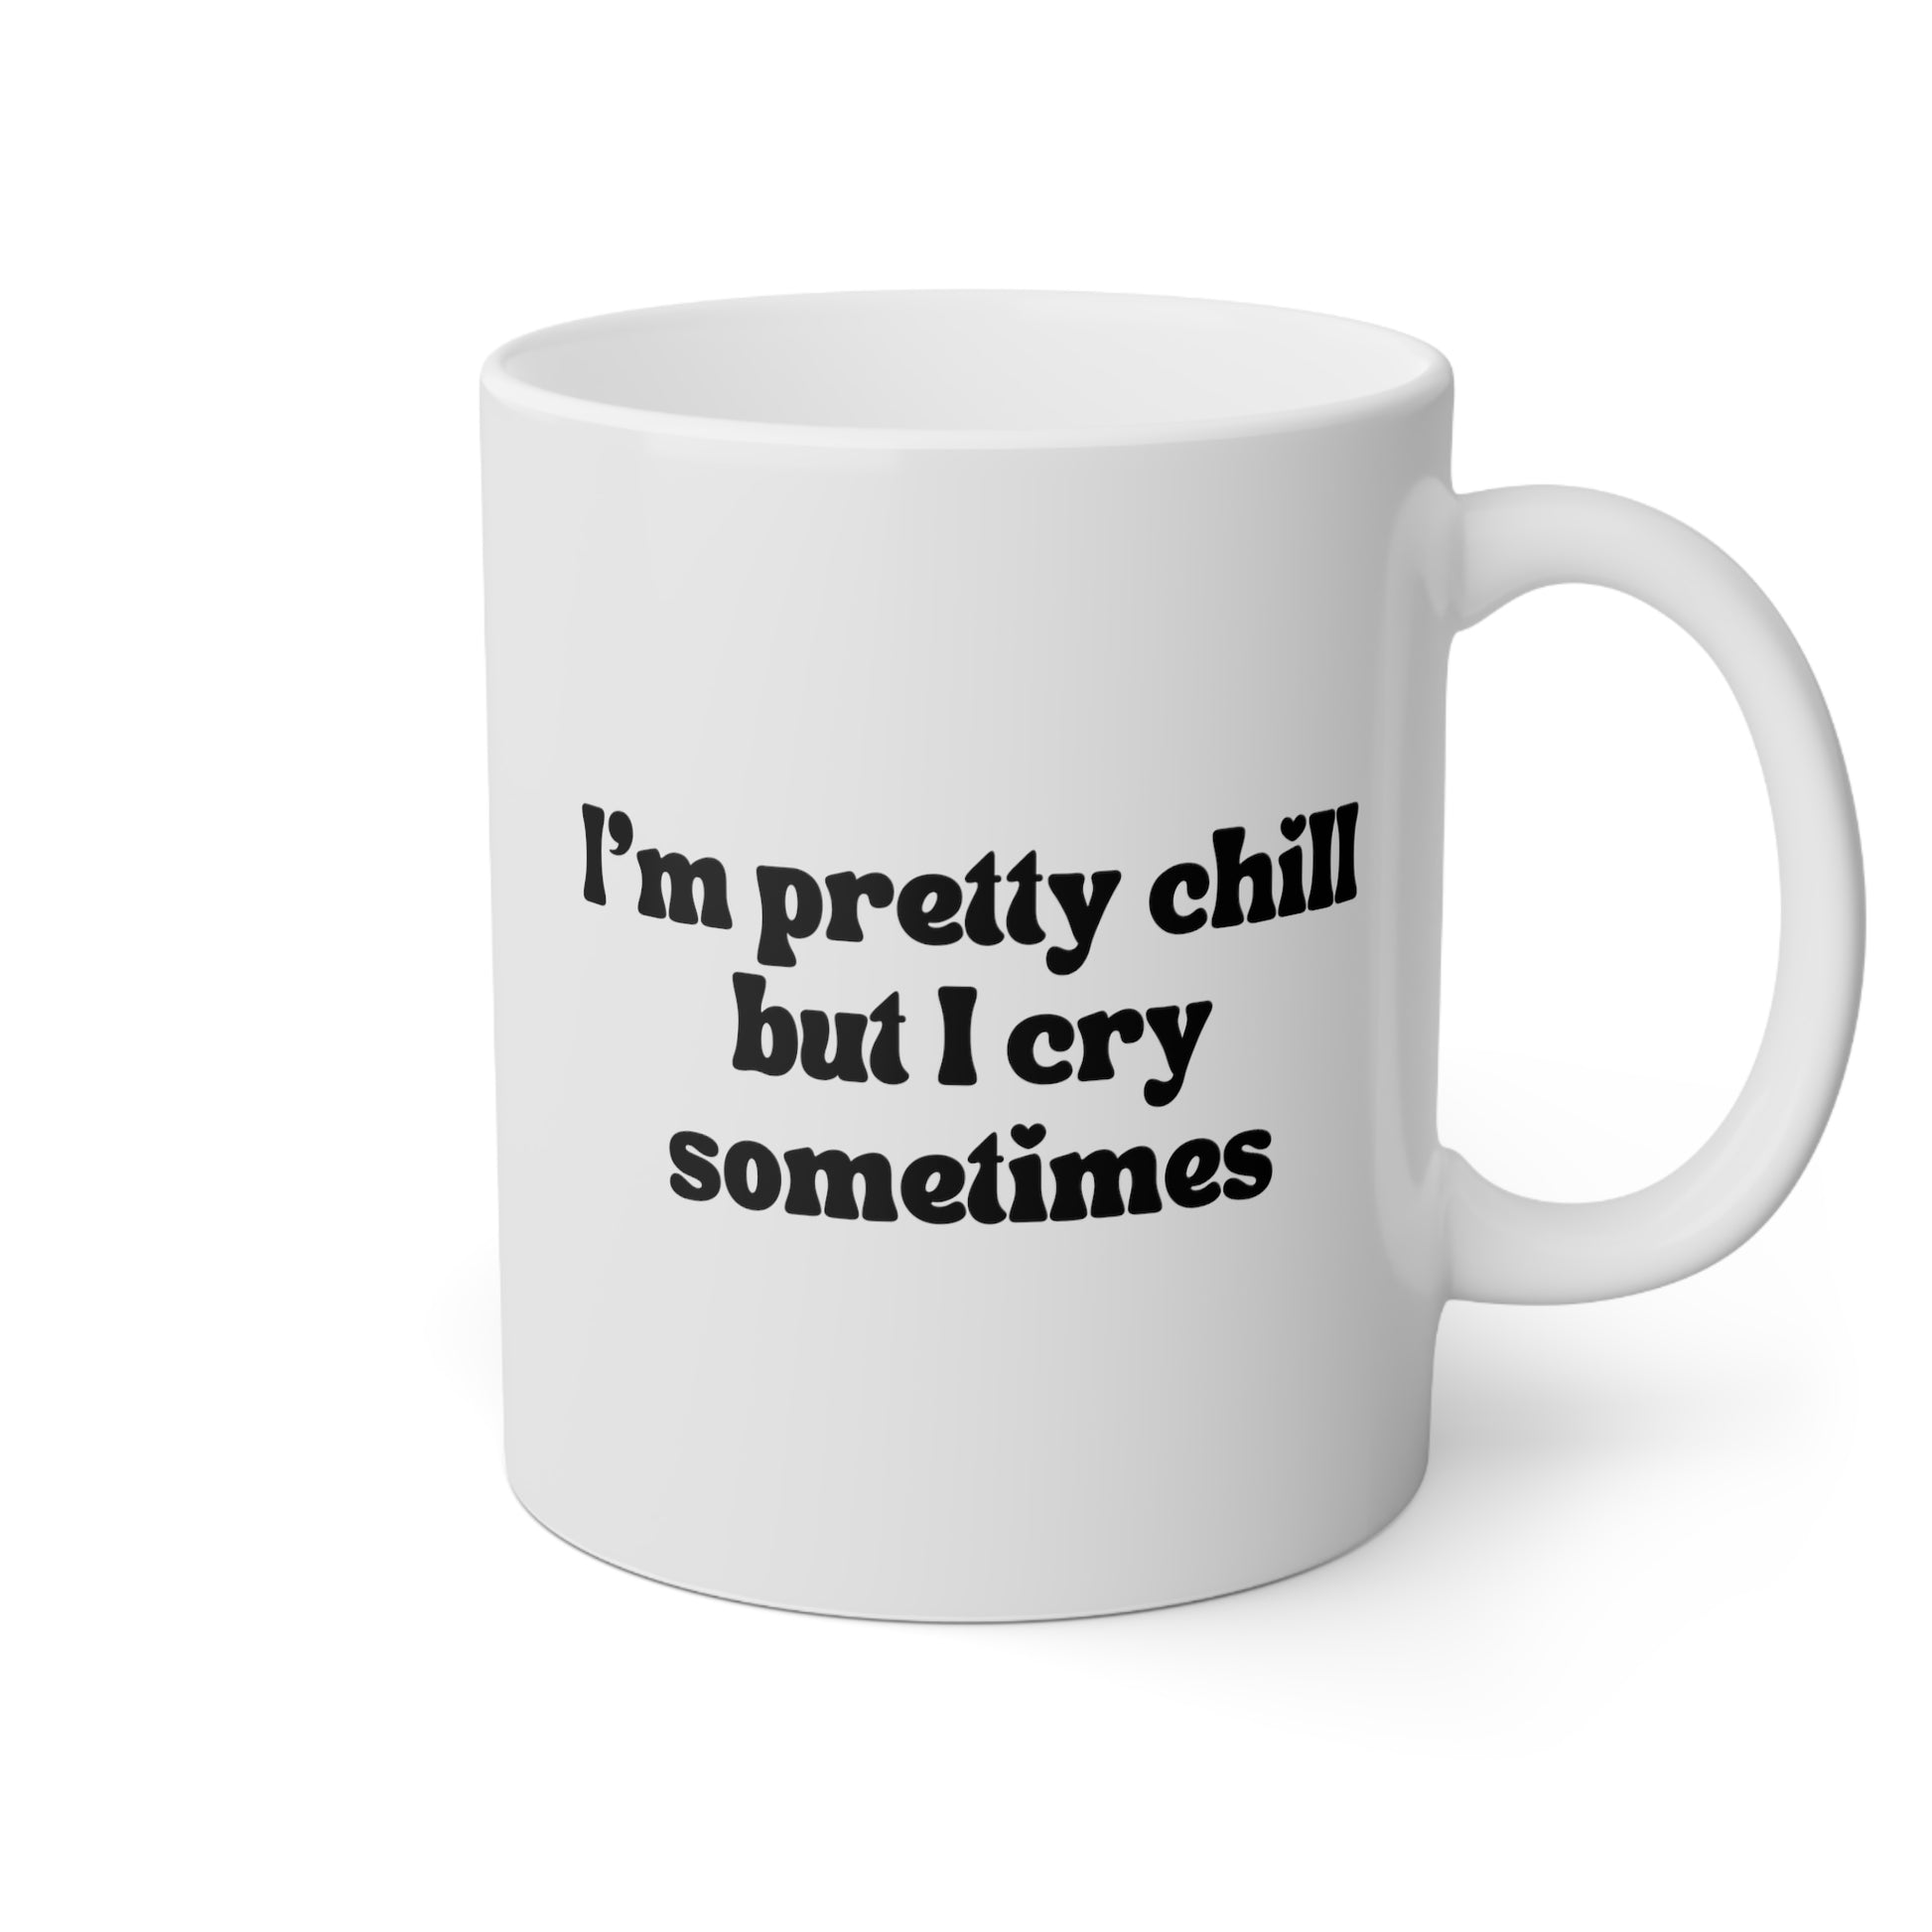 I'm Pretty Chill But I Cry Sometimes 11oz white funny large coffee mug gift for best friend cute mental health anxiety ok to cry waveywares wavey wares wavywares wavy wares